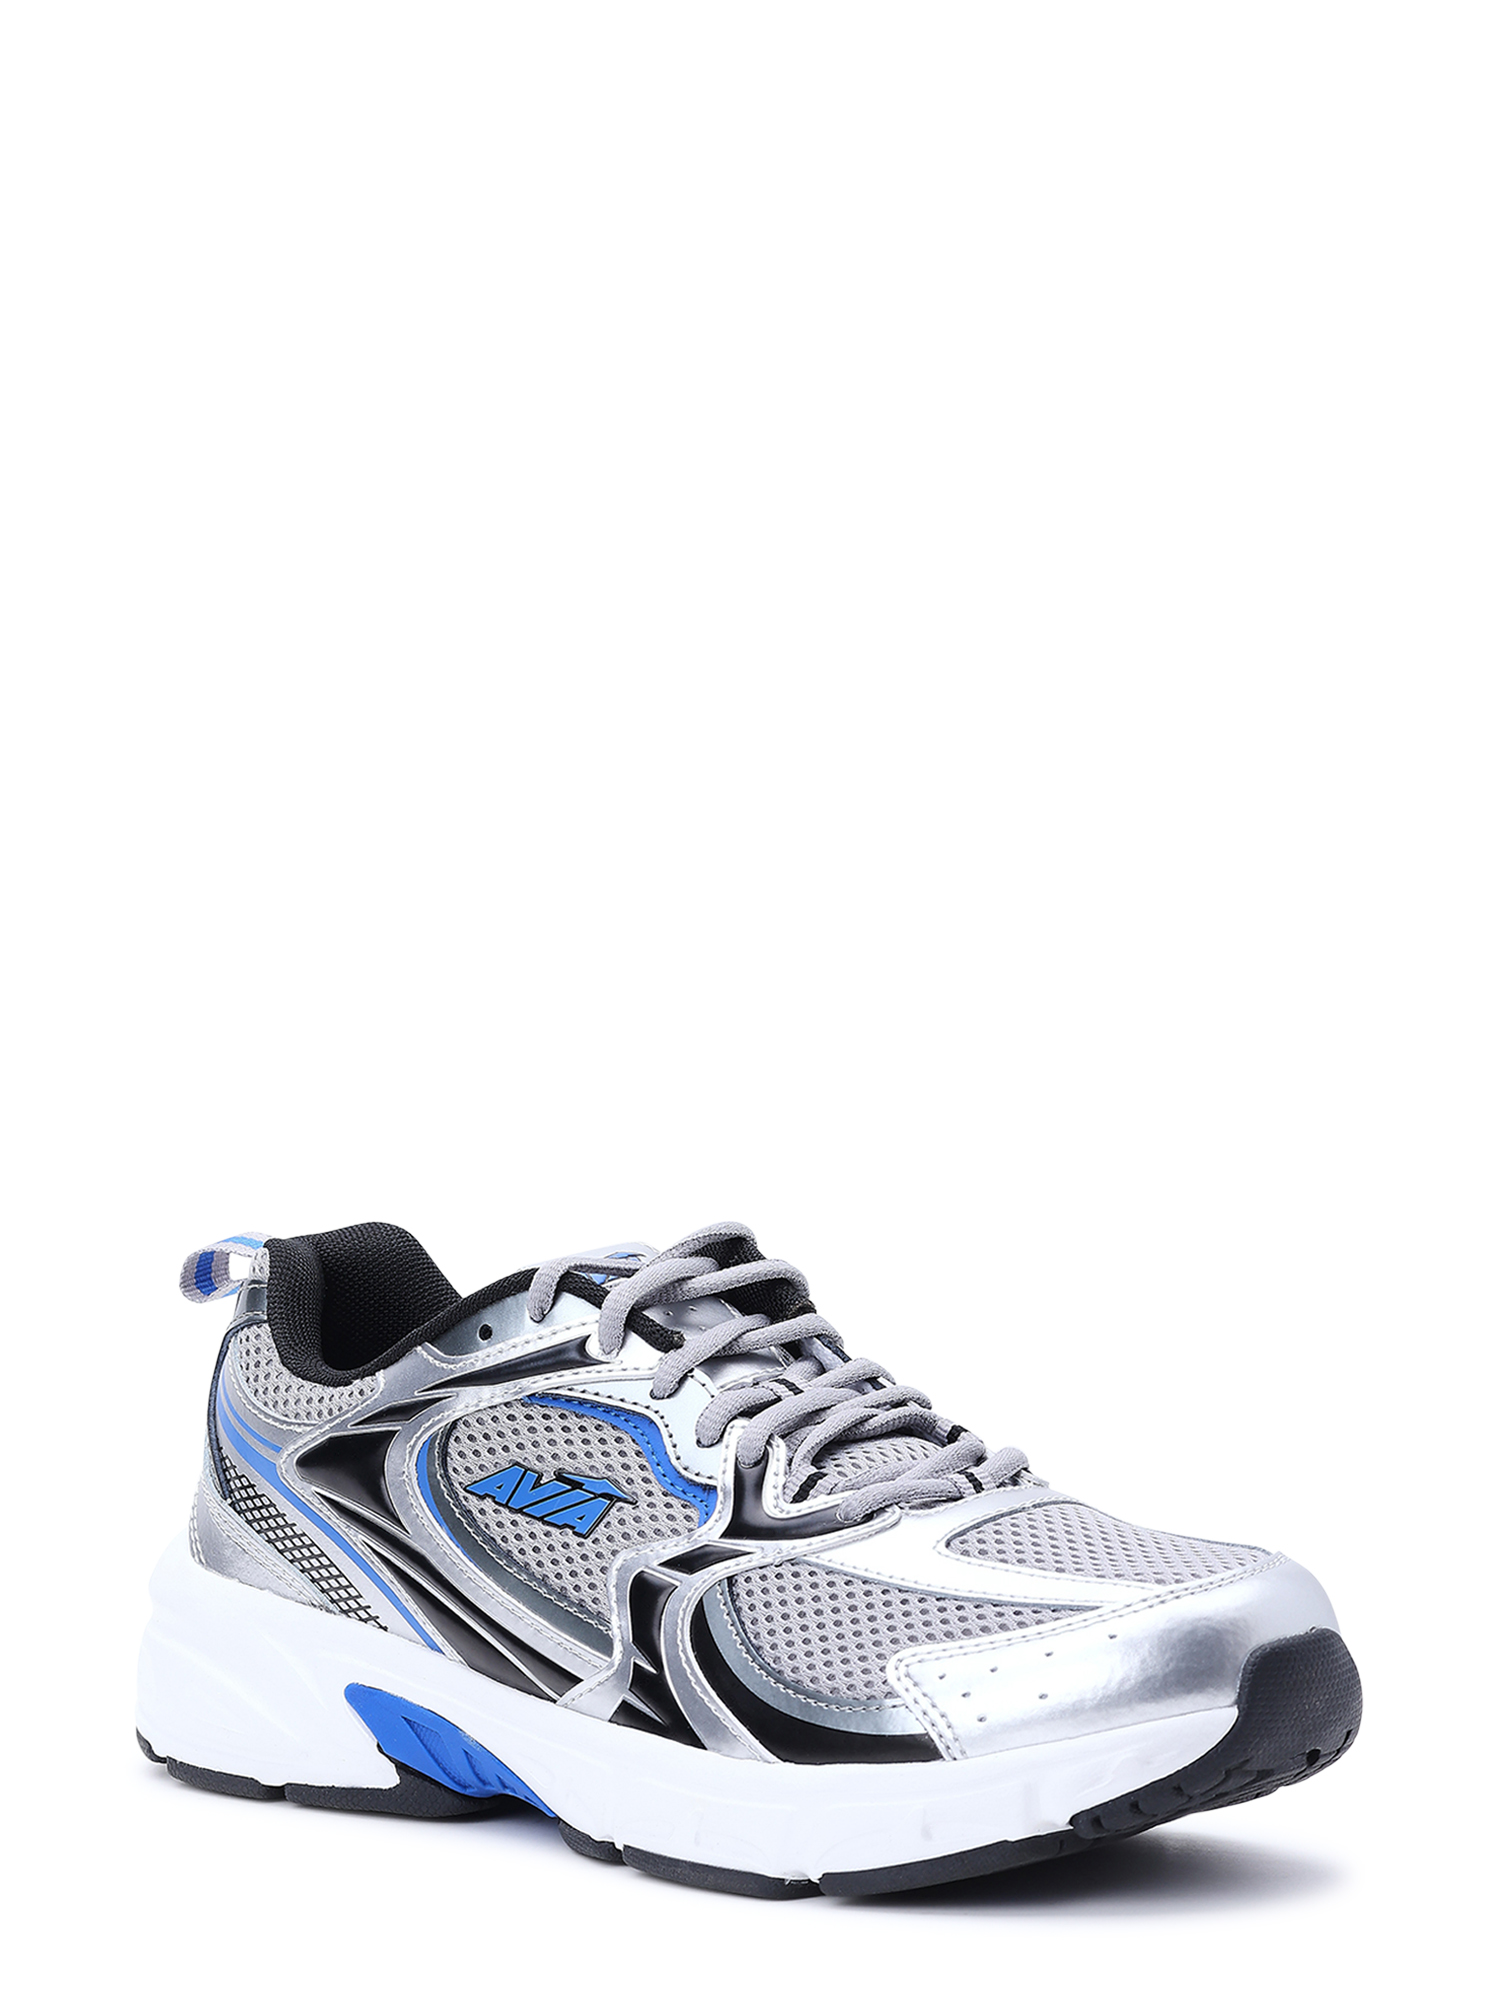 Avia Men's 5000 Athletic Performance Running Shoes (Wide Width ...